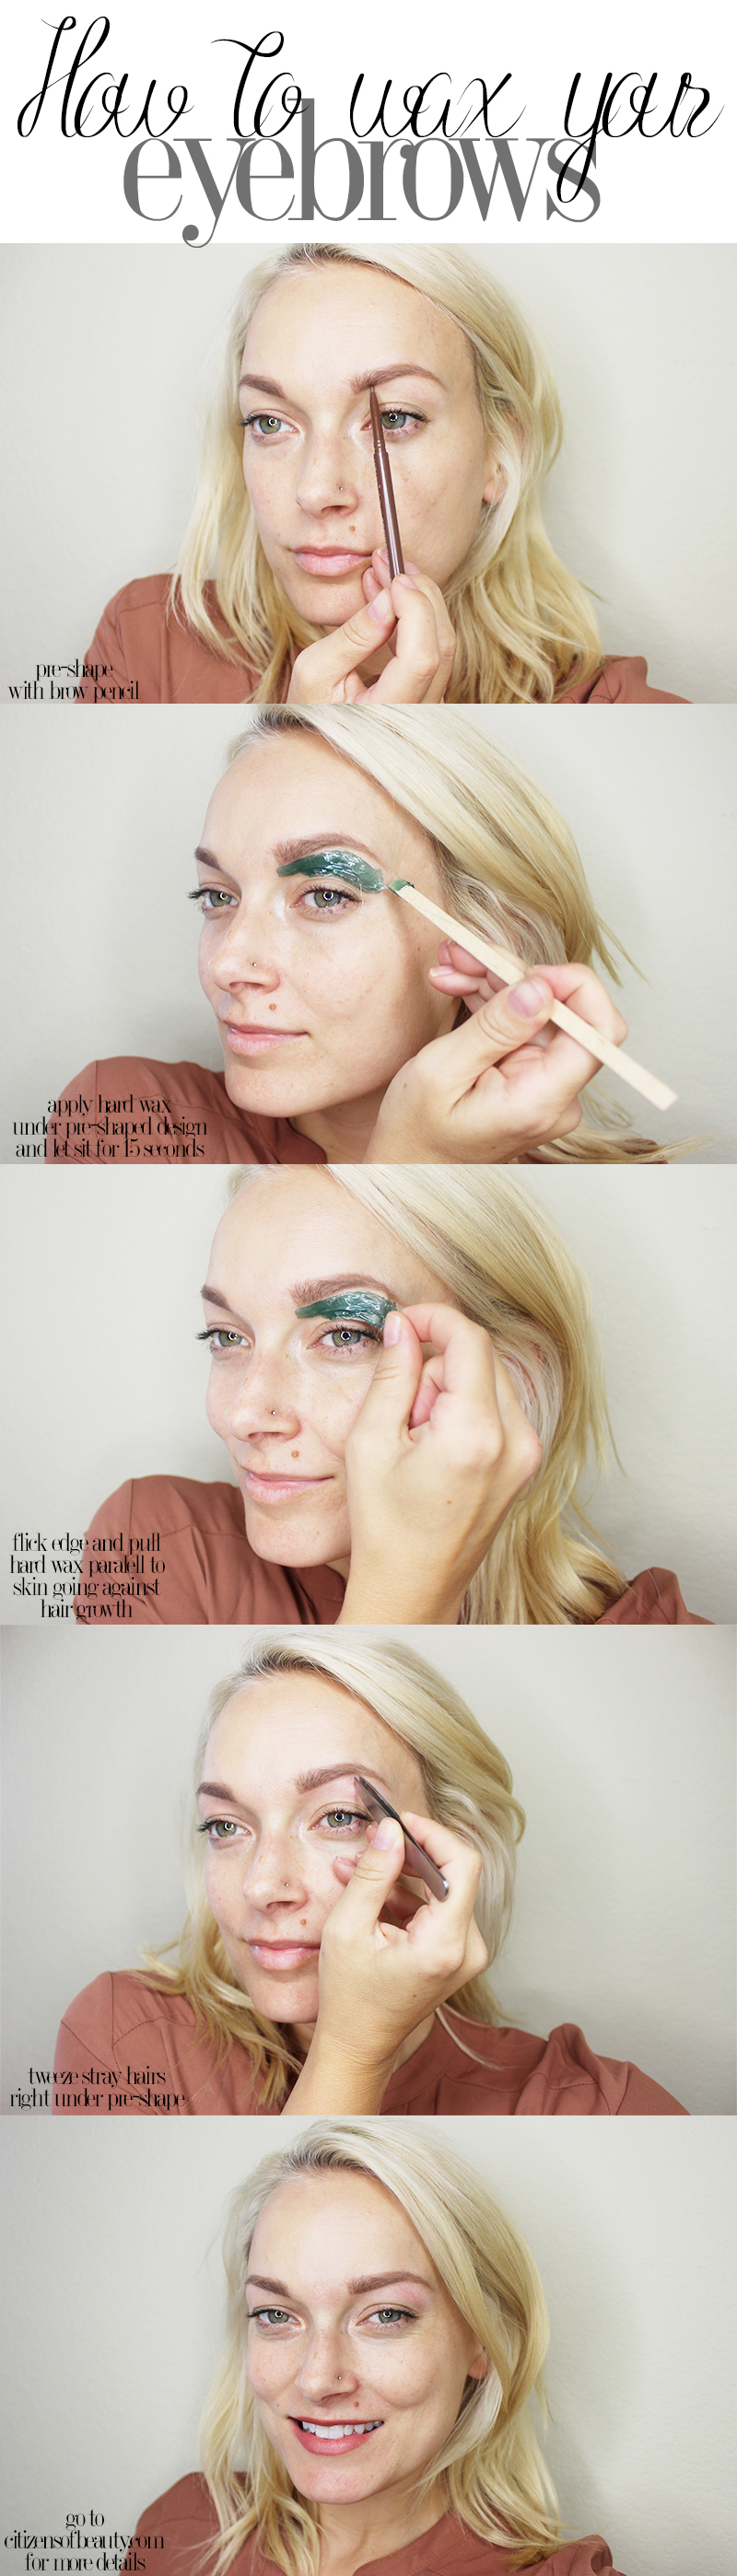 How to Wax Your Eyebrows at Home - Citizens of Beauty